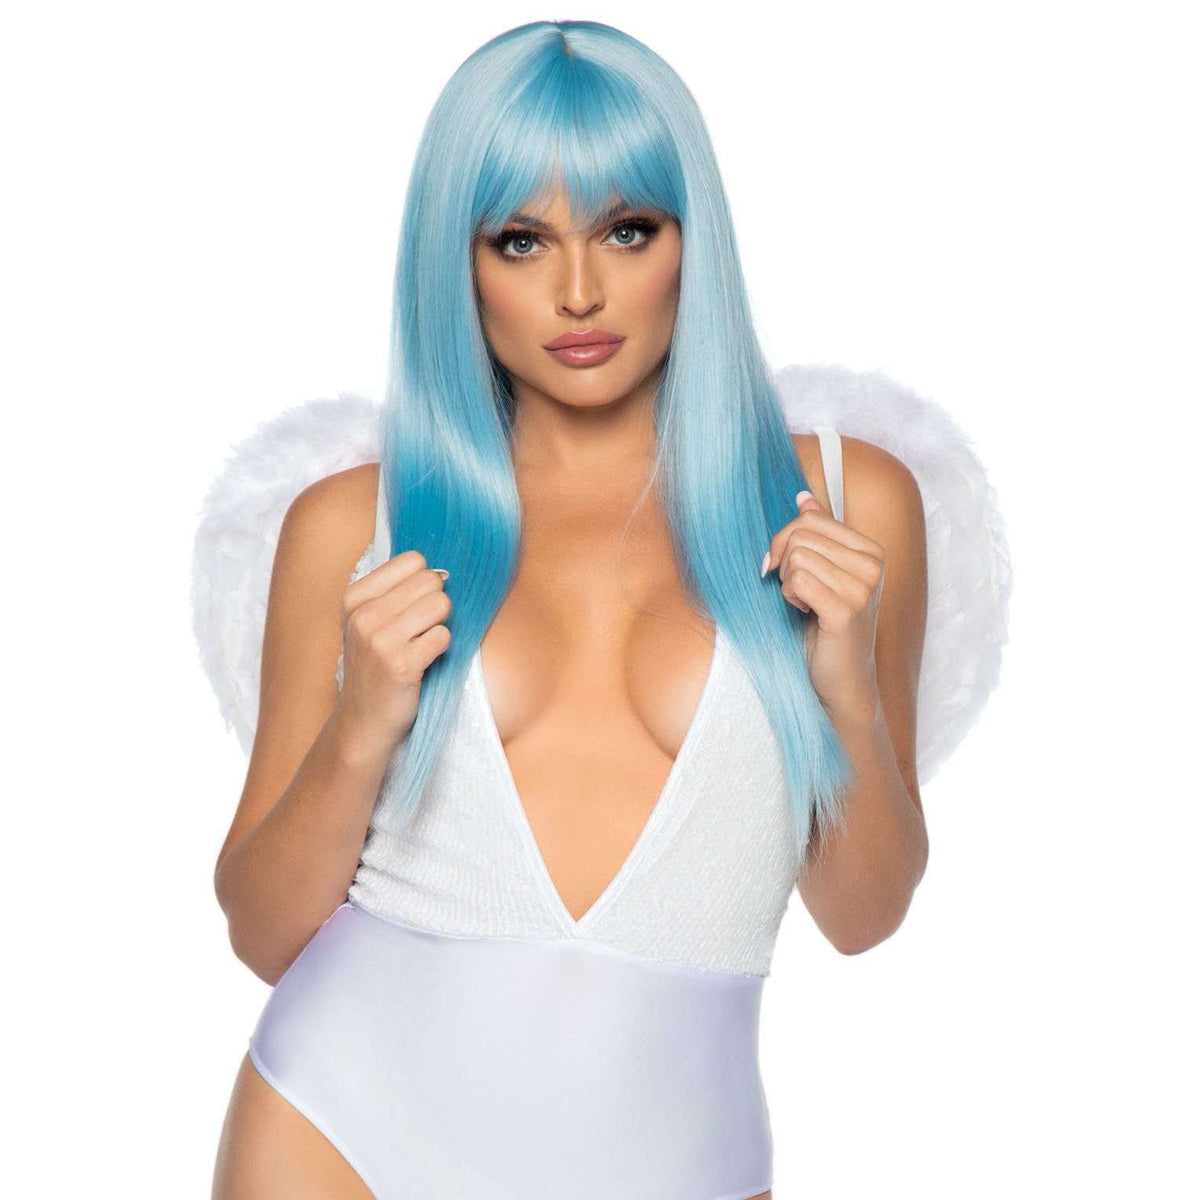 Marabou Trimmer White Feather Angel Wings